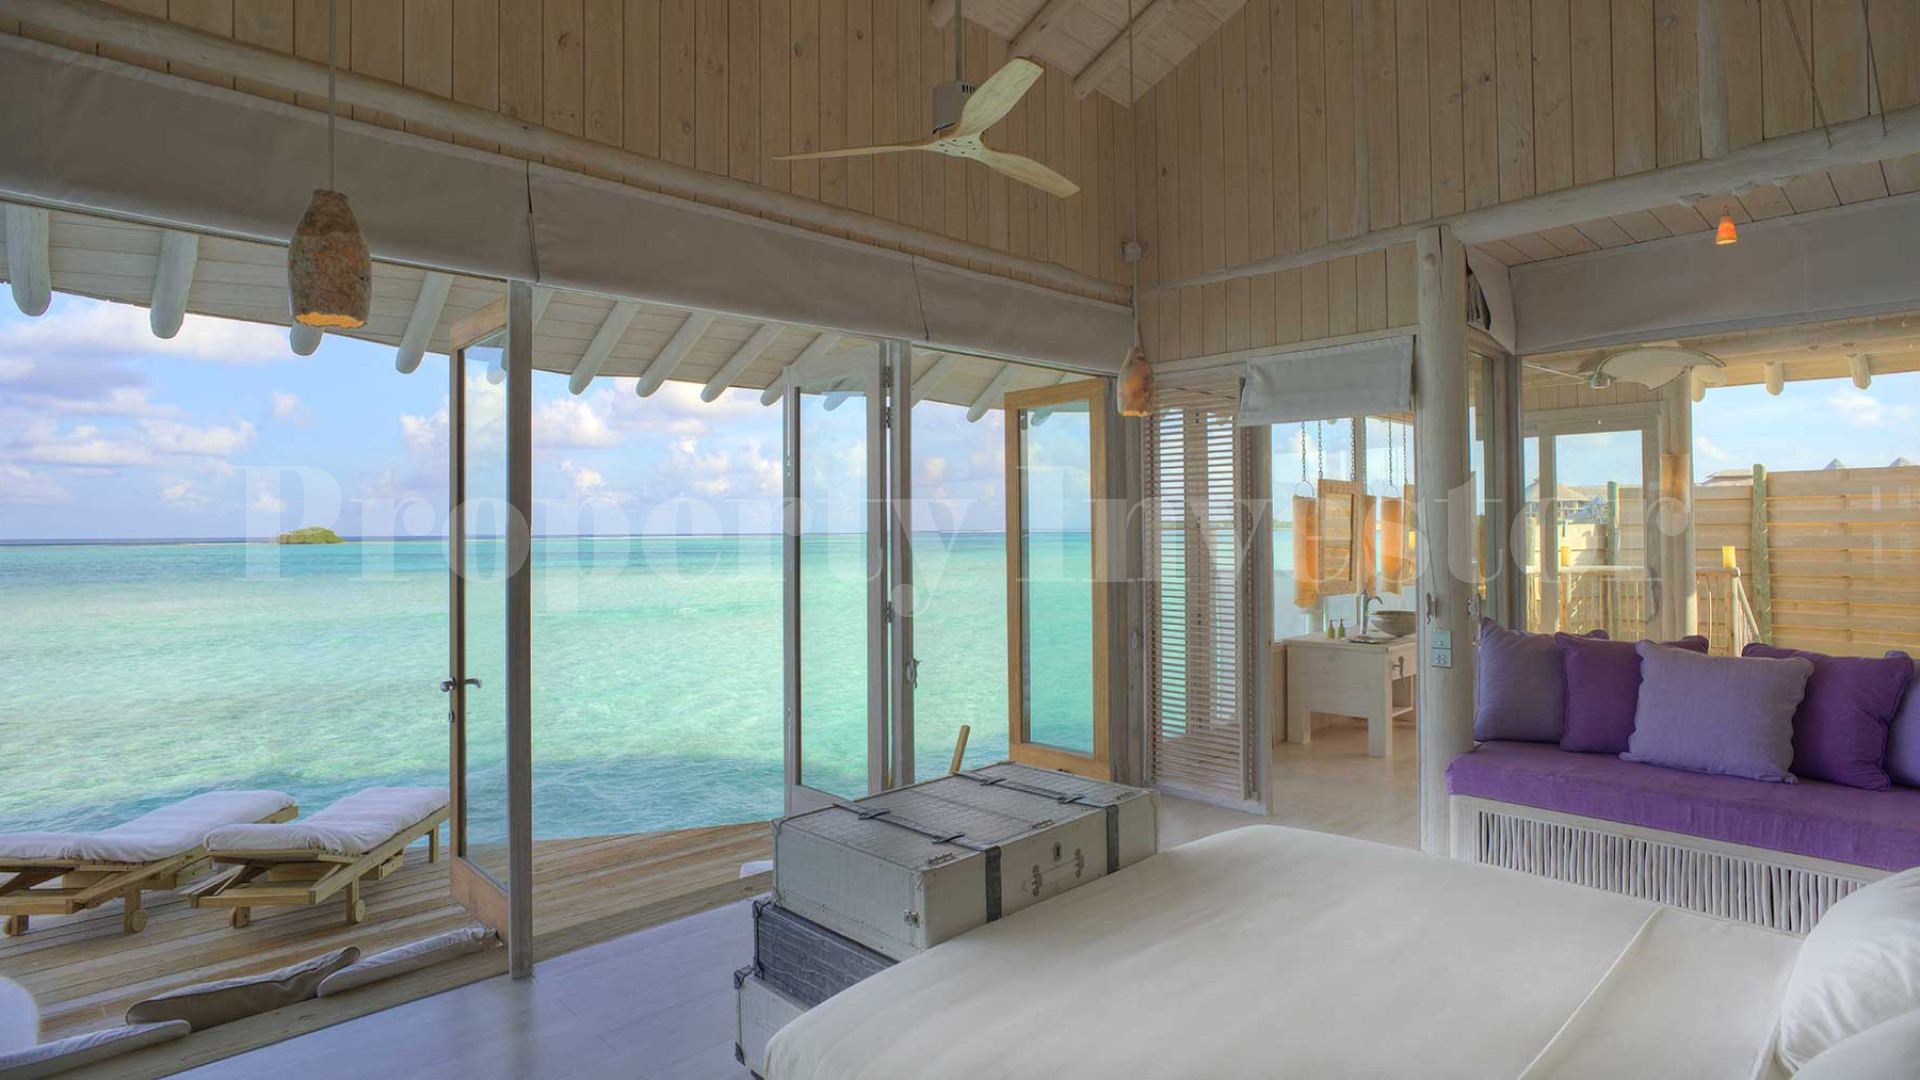 2 Bedroom Overwater Villa with Slide in the Maldives